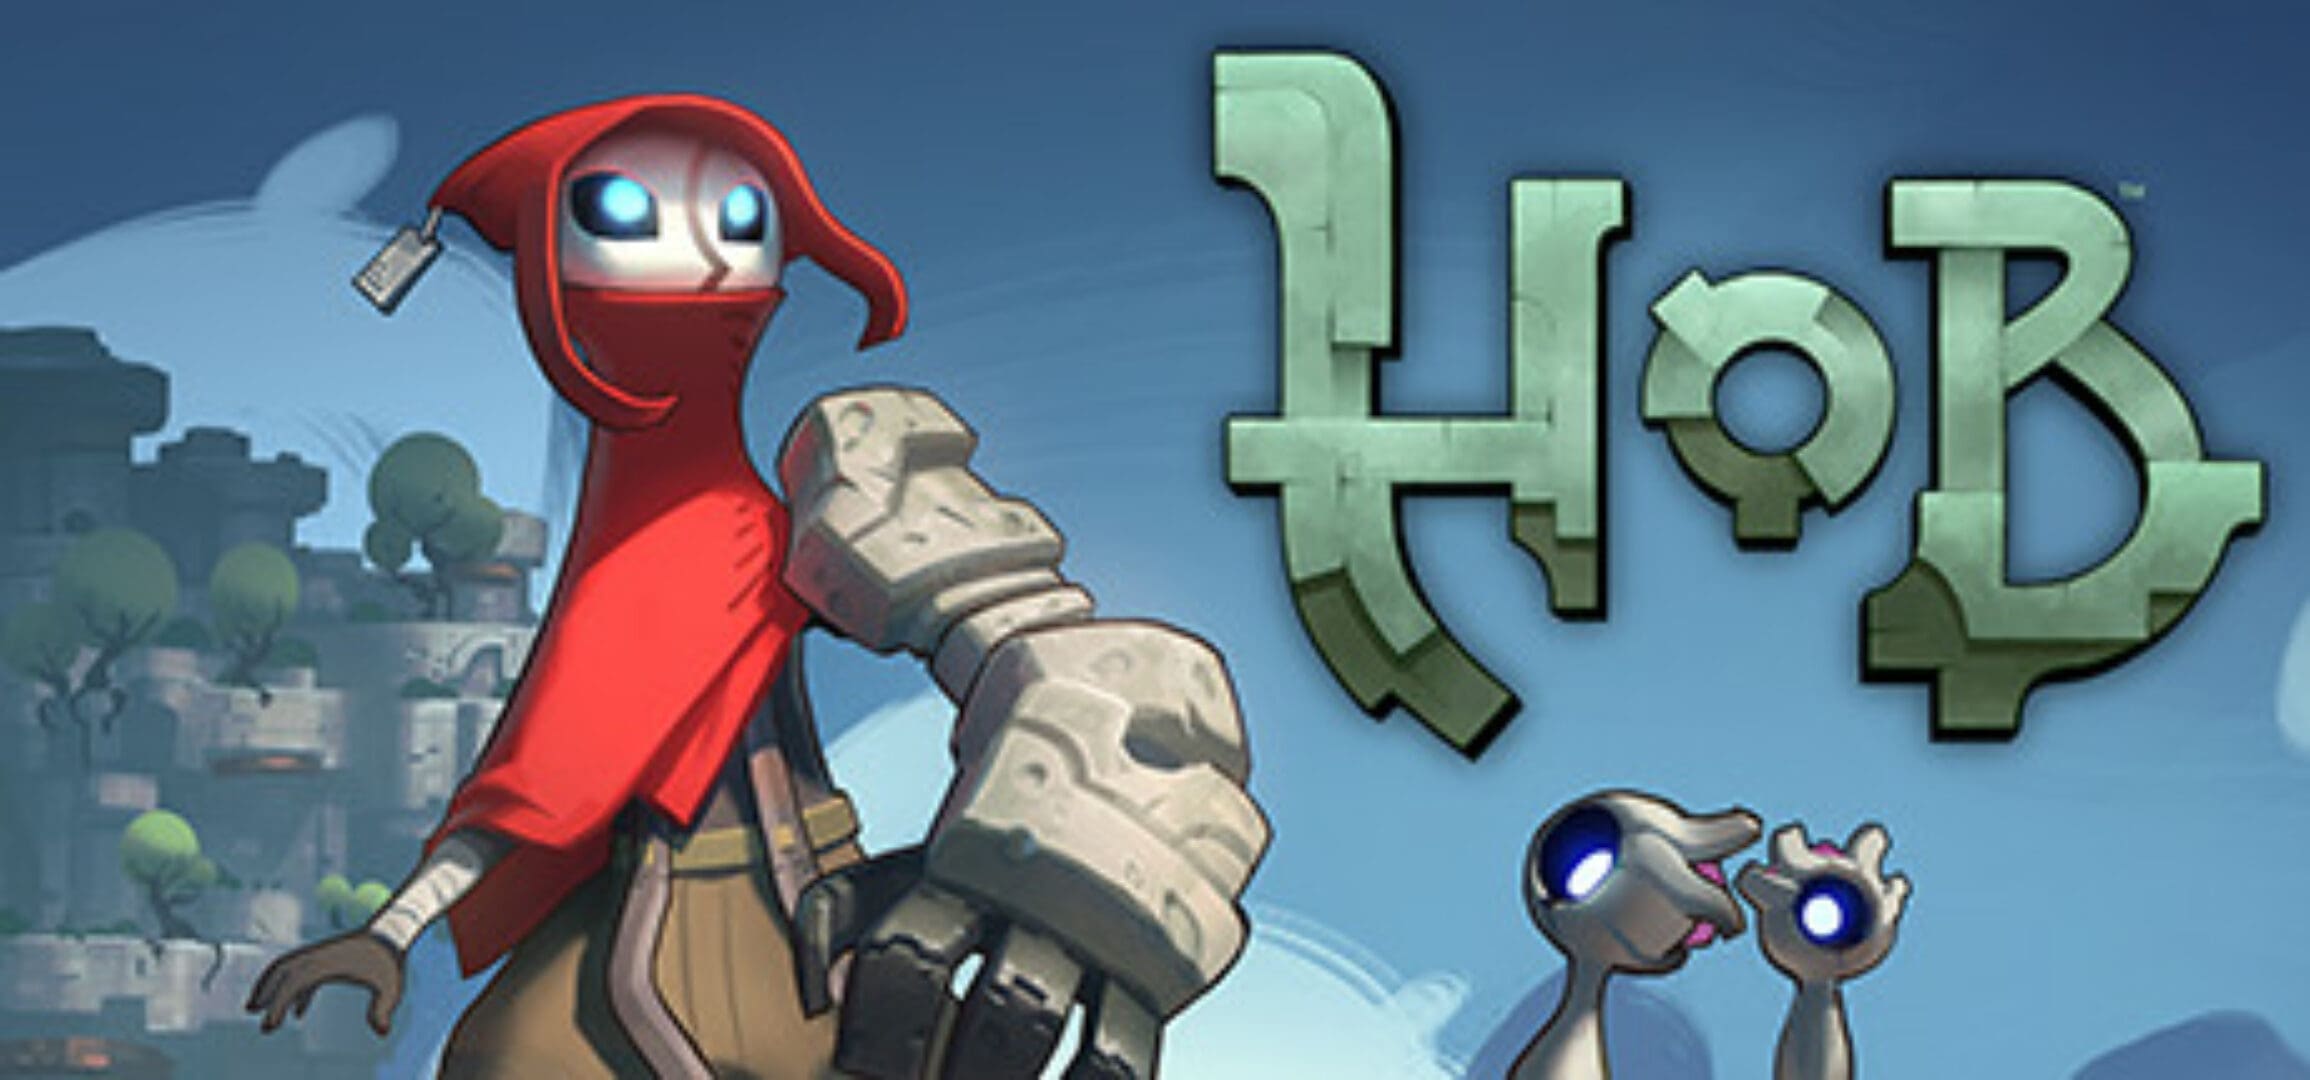 Runic Games Announces Released Date for Hob